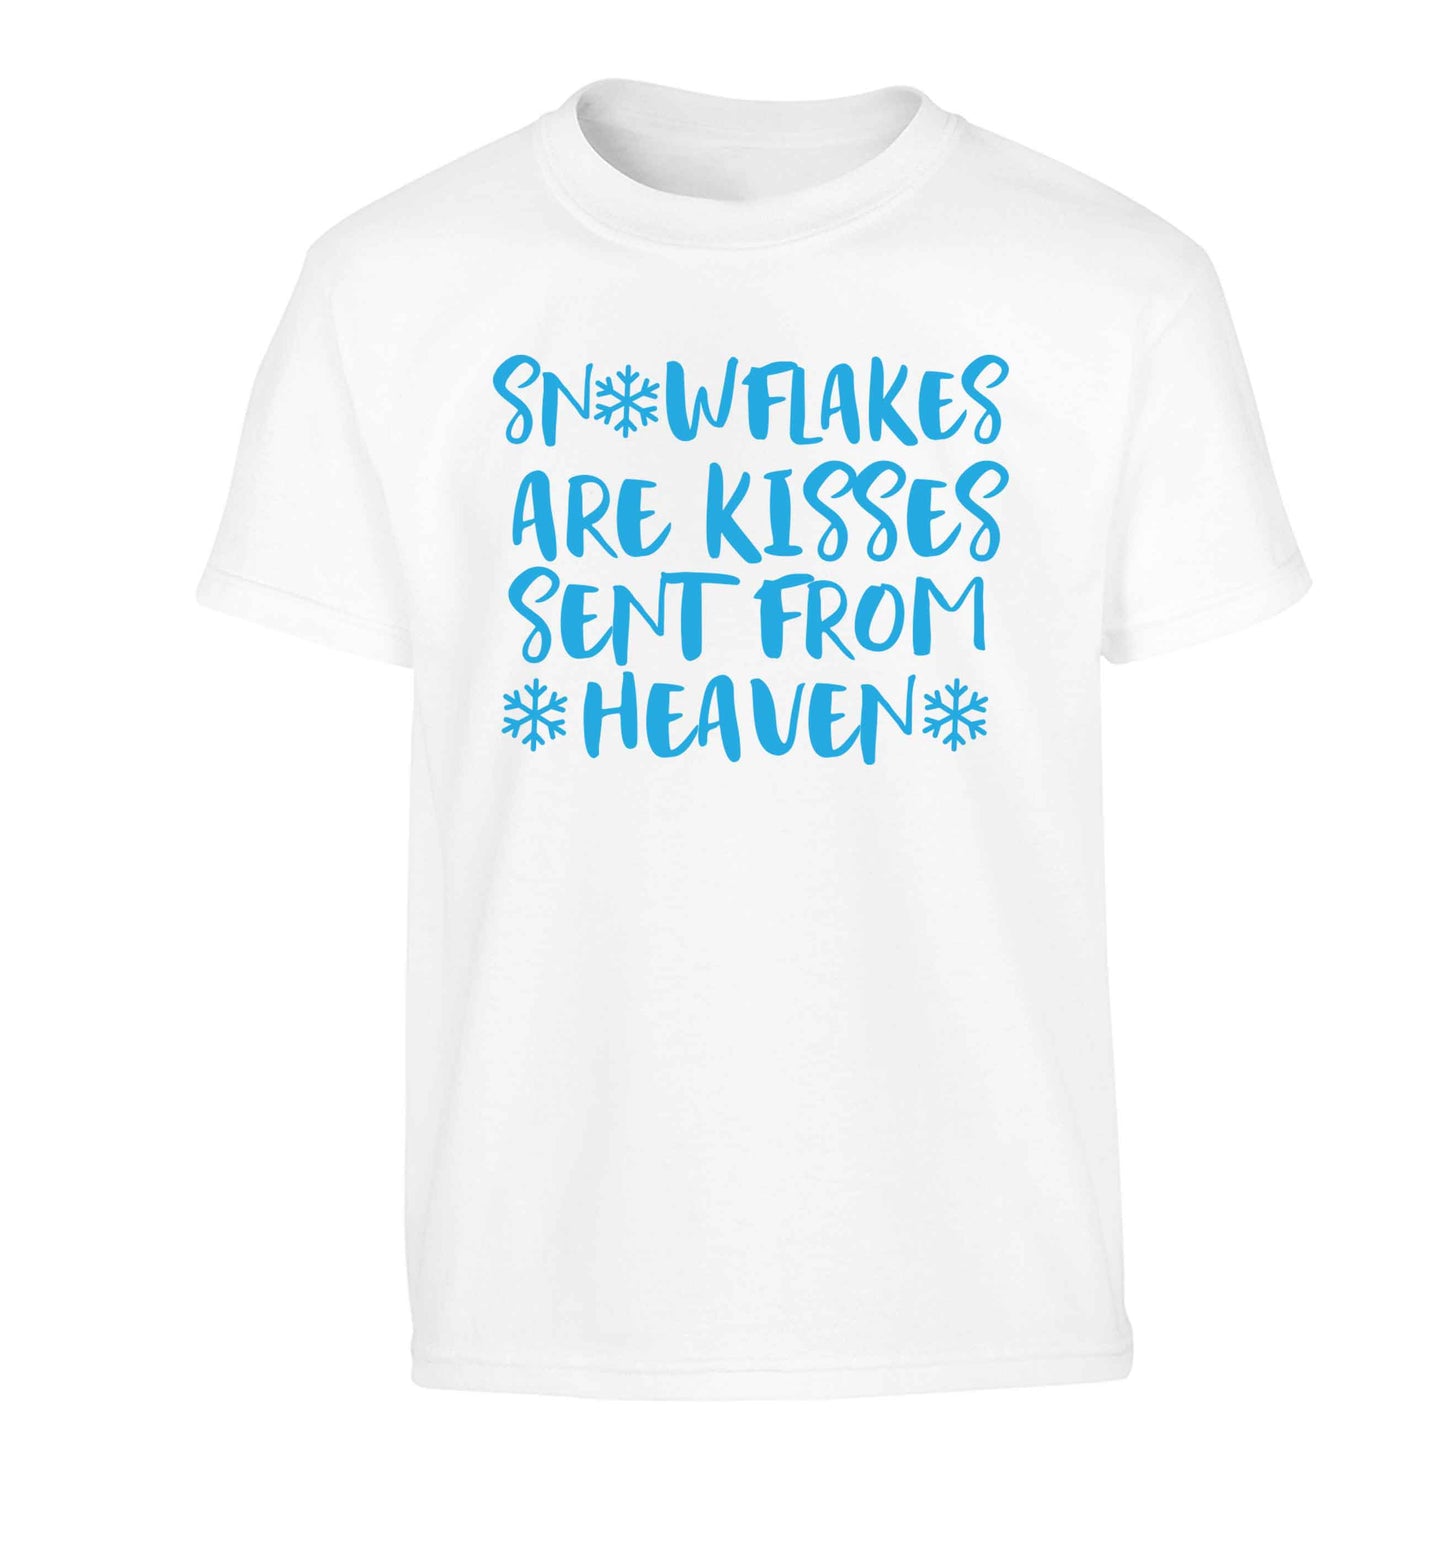 Snowflakes are kisses sent from heaven Children's white Tshirt 12-13 Years